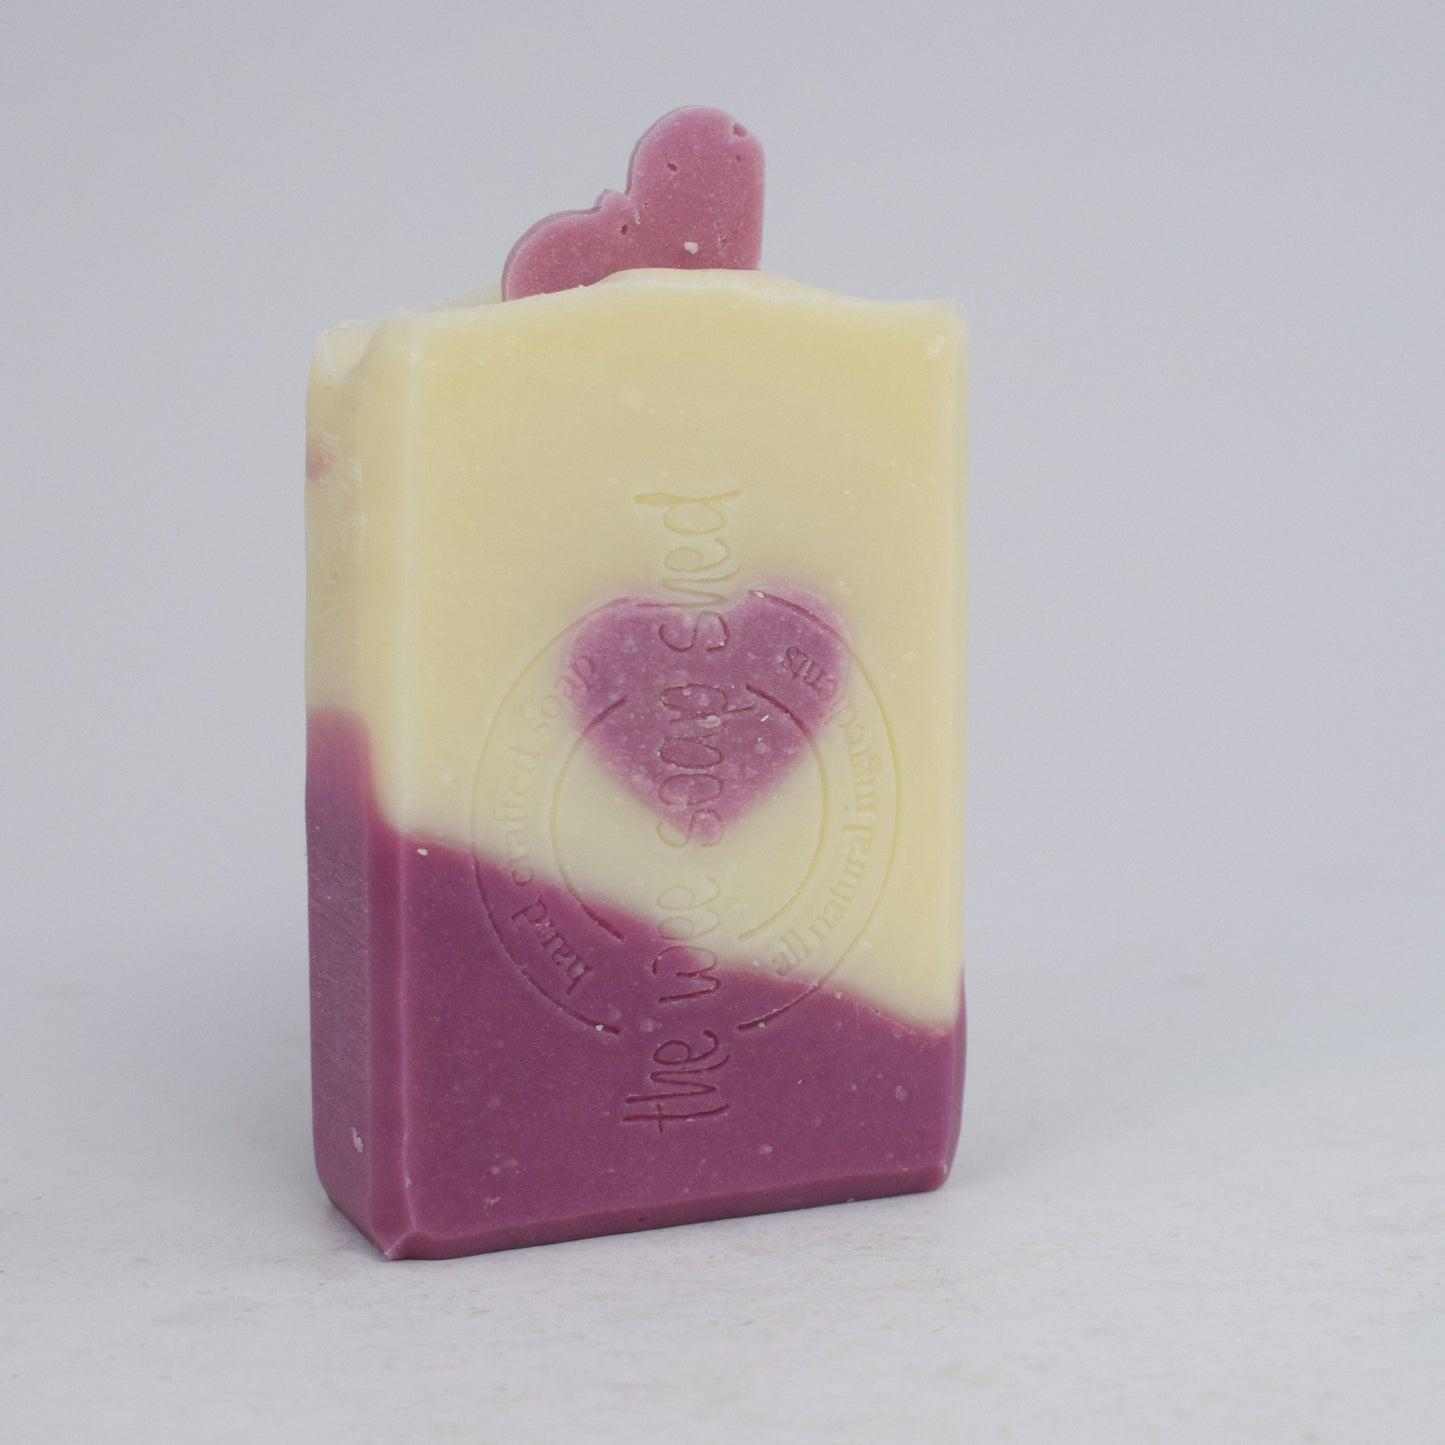 The Wee Soap Shed - Loving Me. Our special edition Valentine soap scented with bergamot & pink grapefruit essential oils